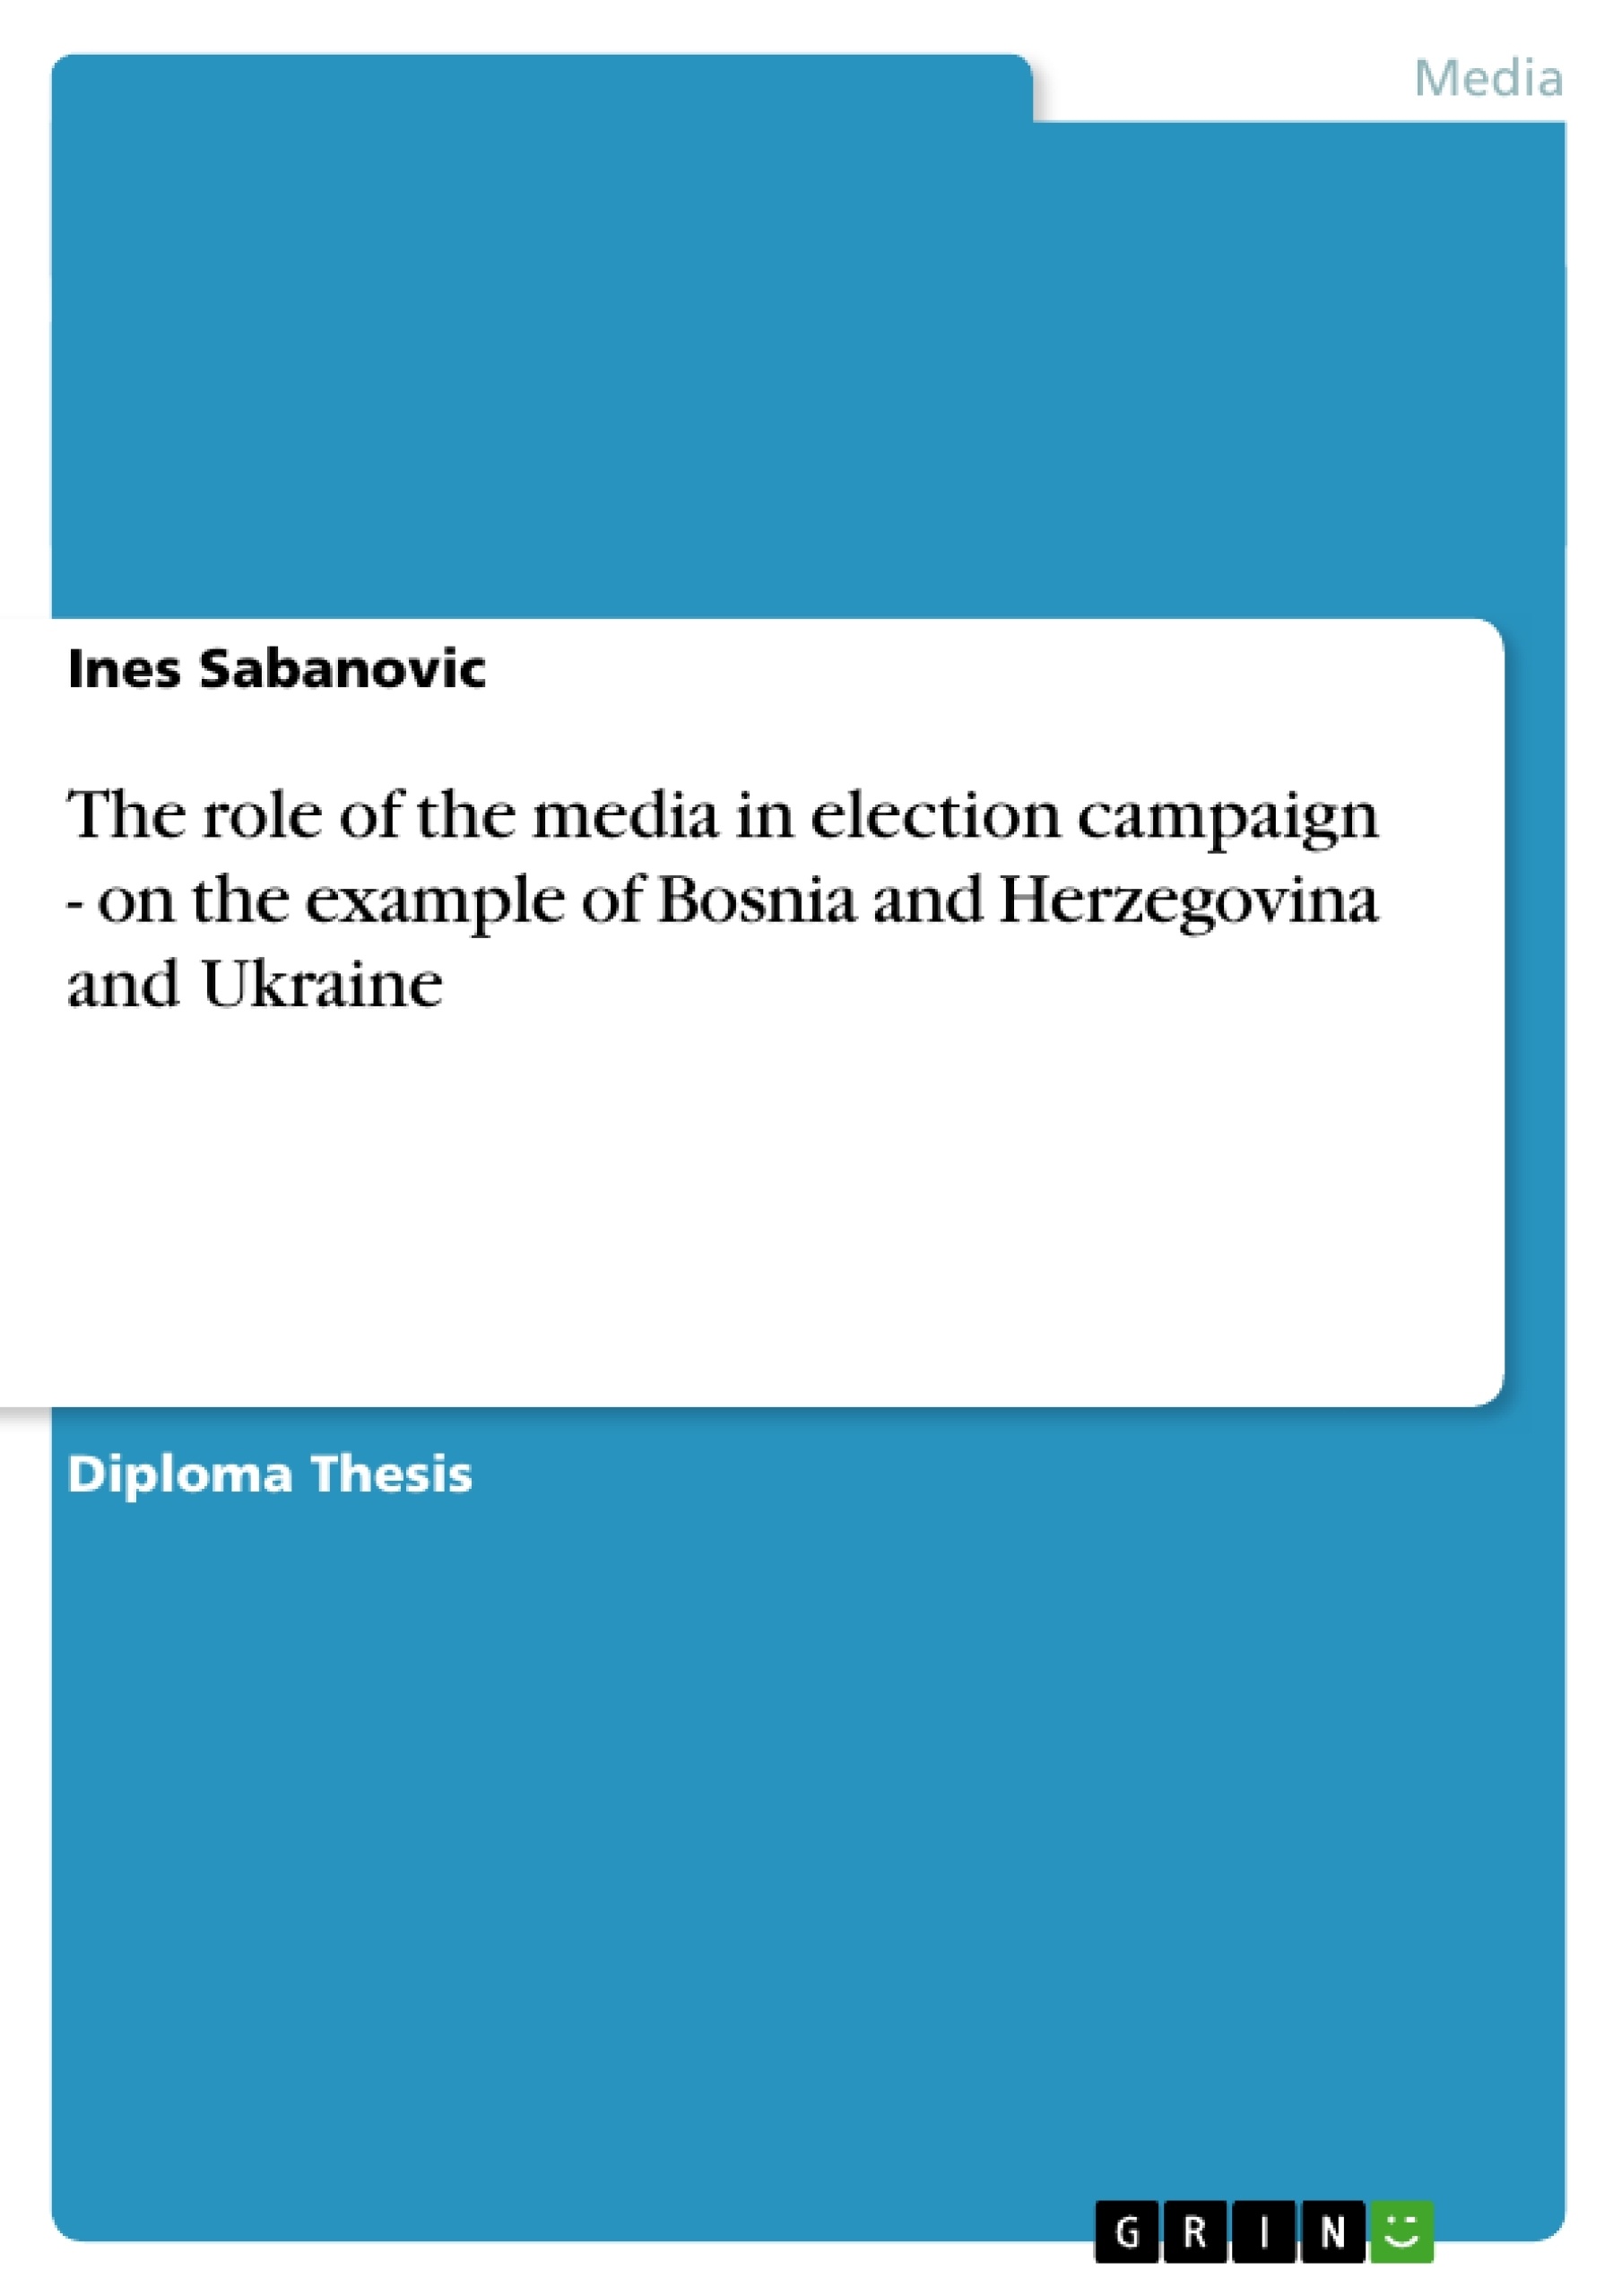 Título: The role of the media in election campaign - on the example of Bosnia and Herzegovina and Ukraine